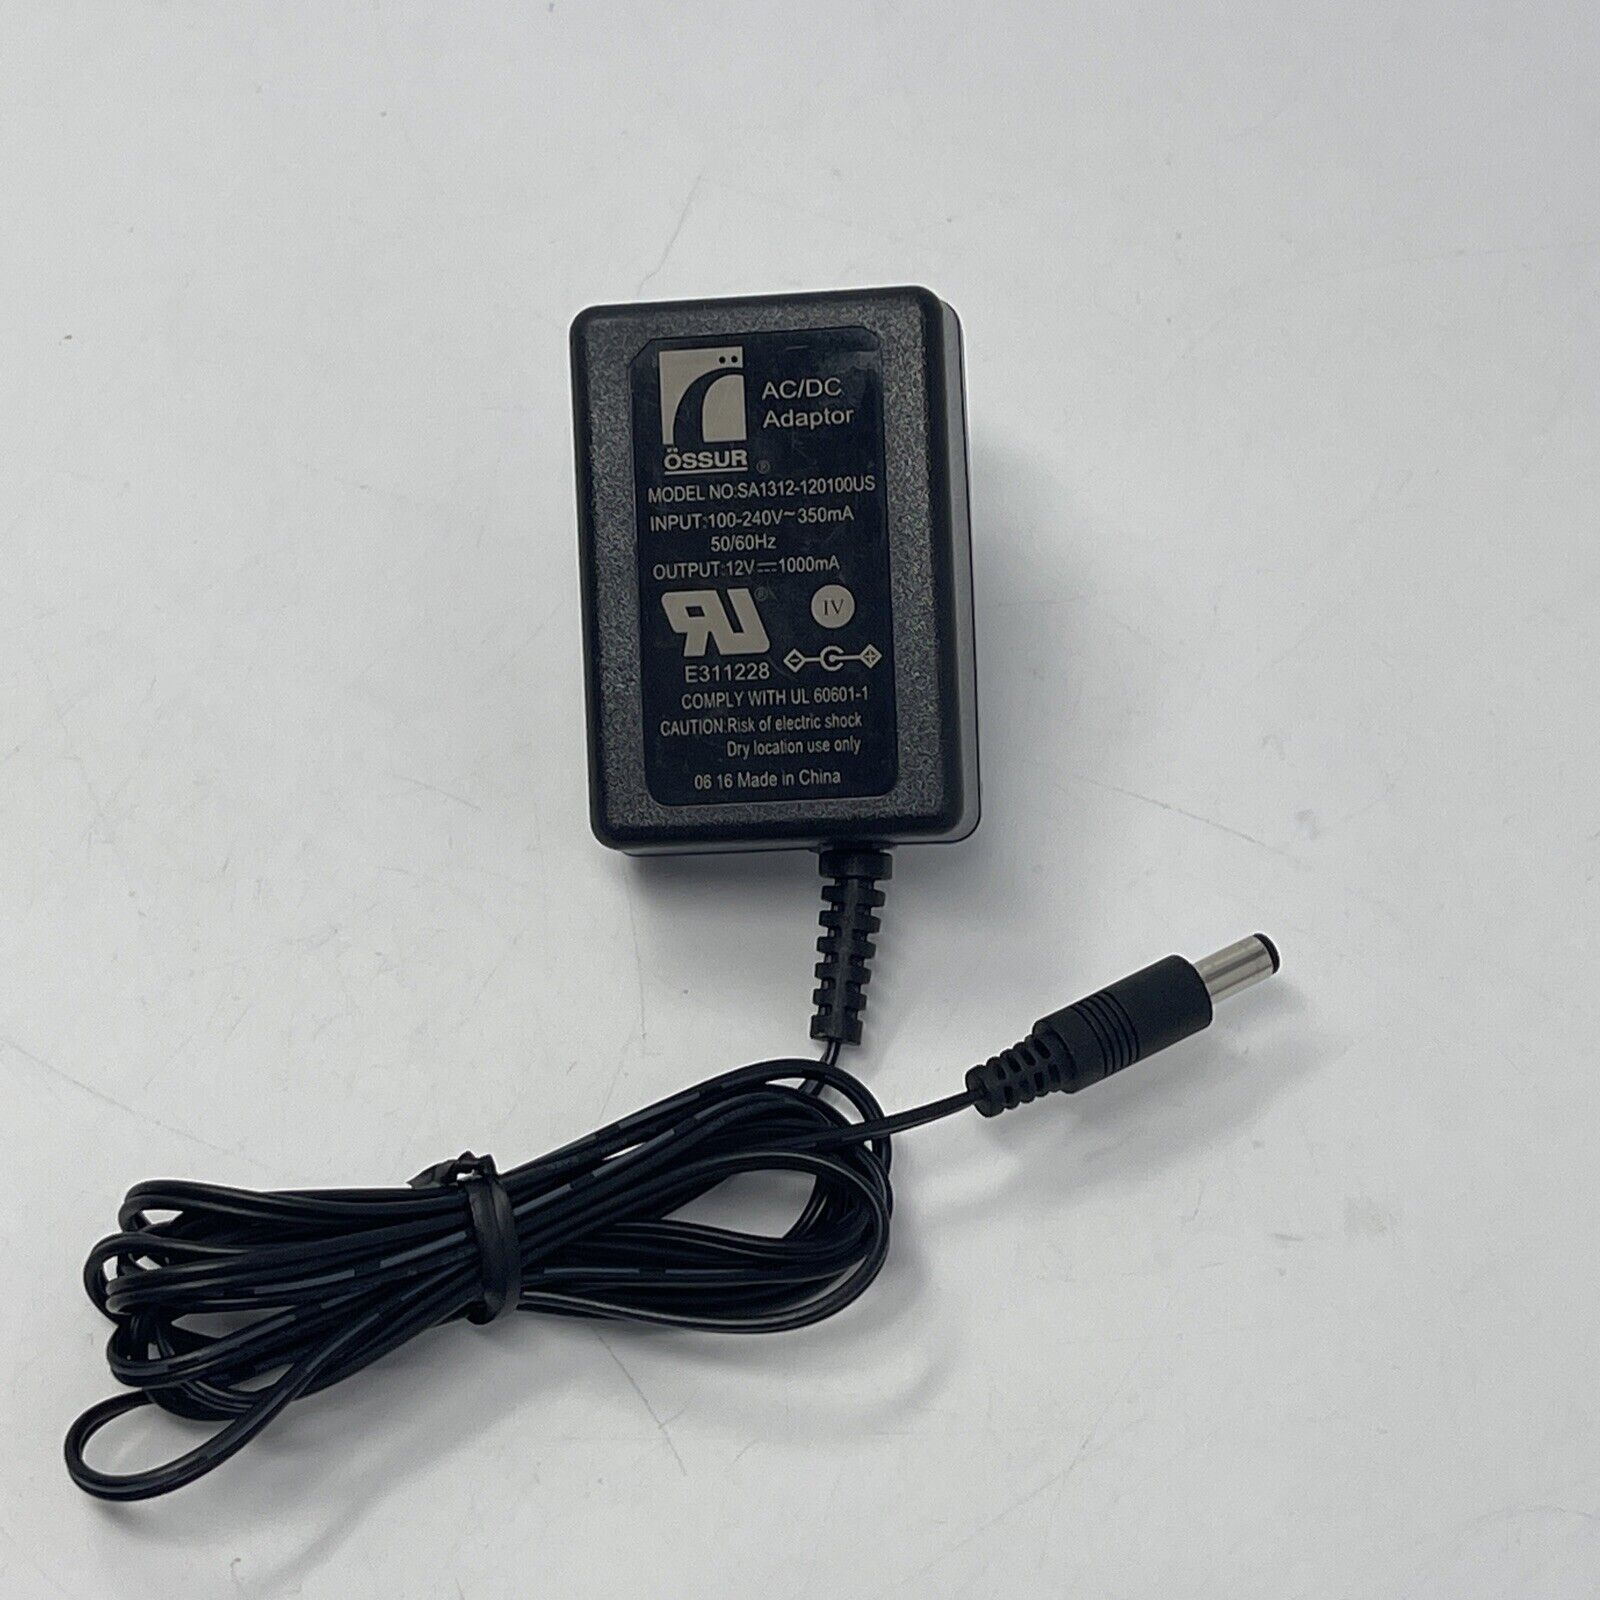 Ossur AC Adapter Power Supply SA1312-120100US 12V 1000mA Össur Charger Cable Brand: Ossur Type: AC/DC Adapter Conn